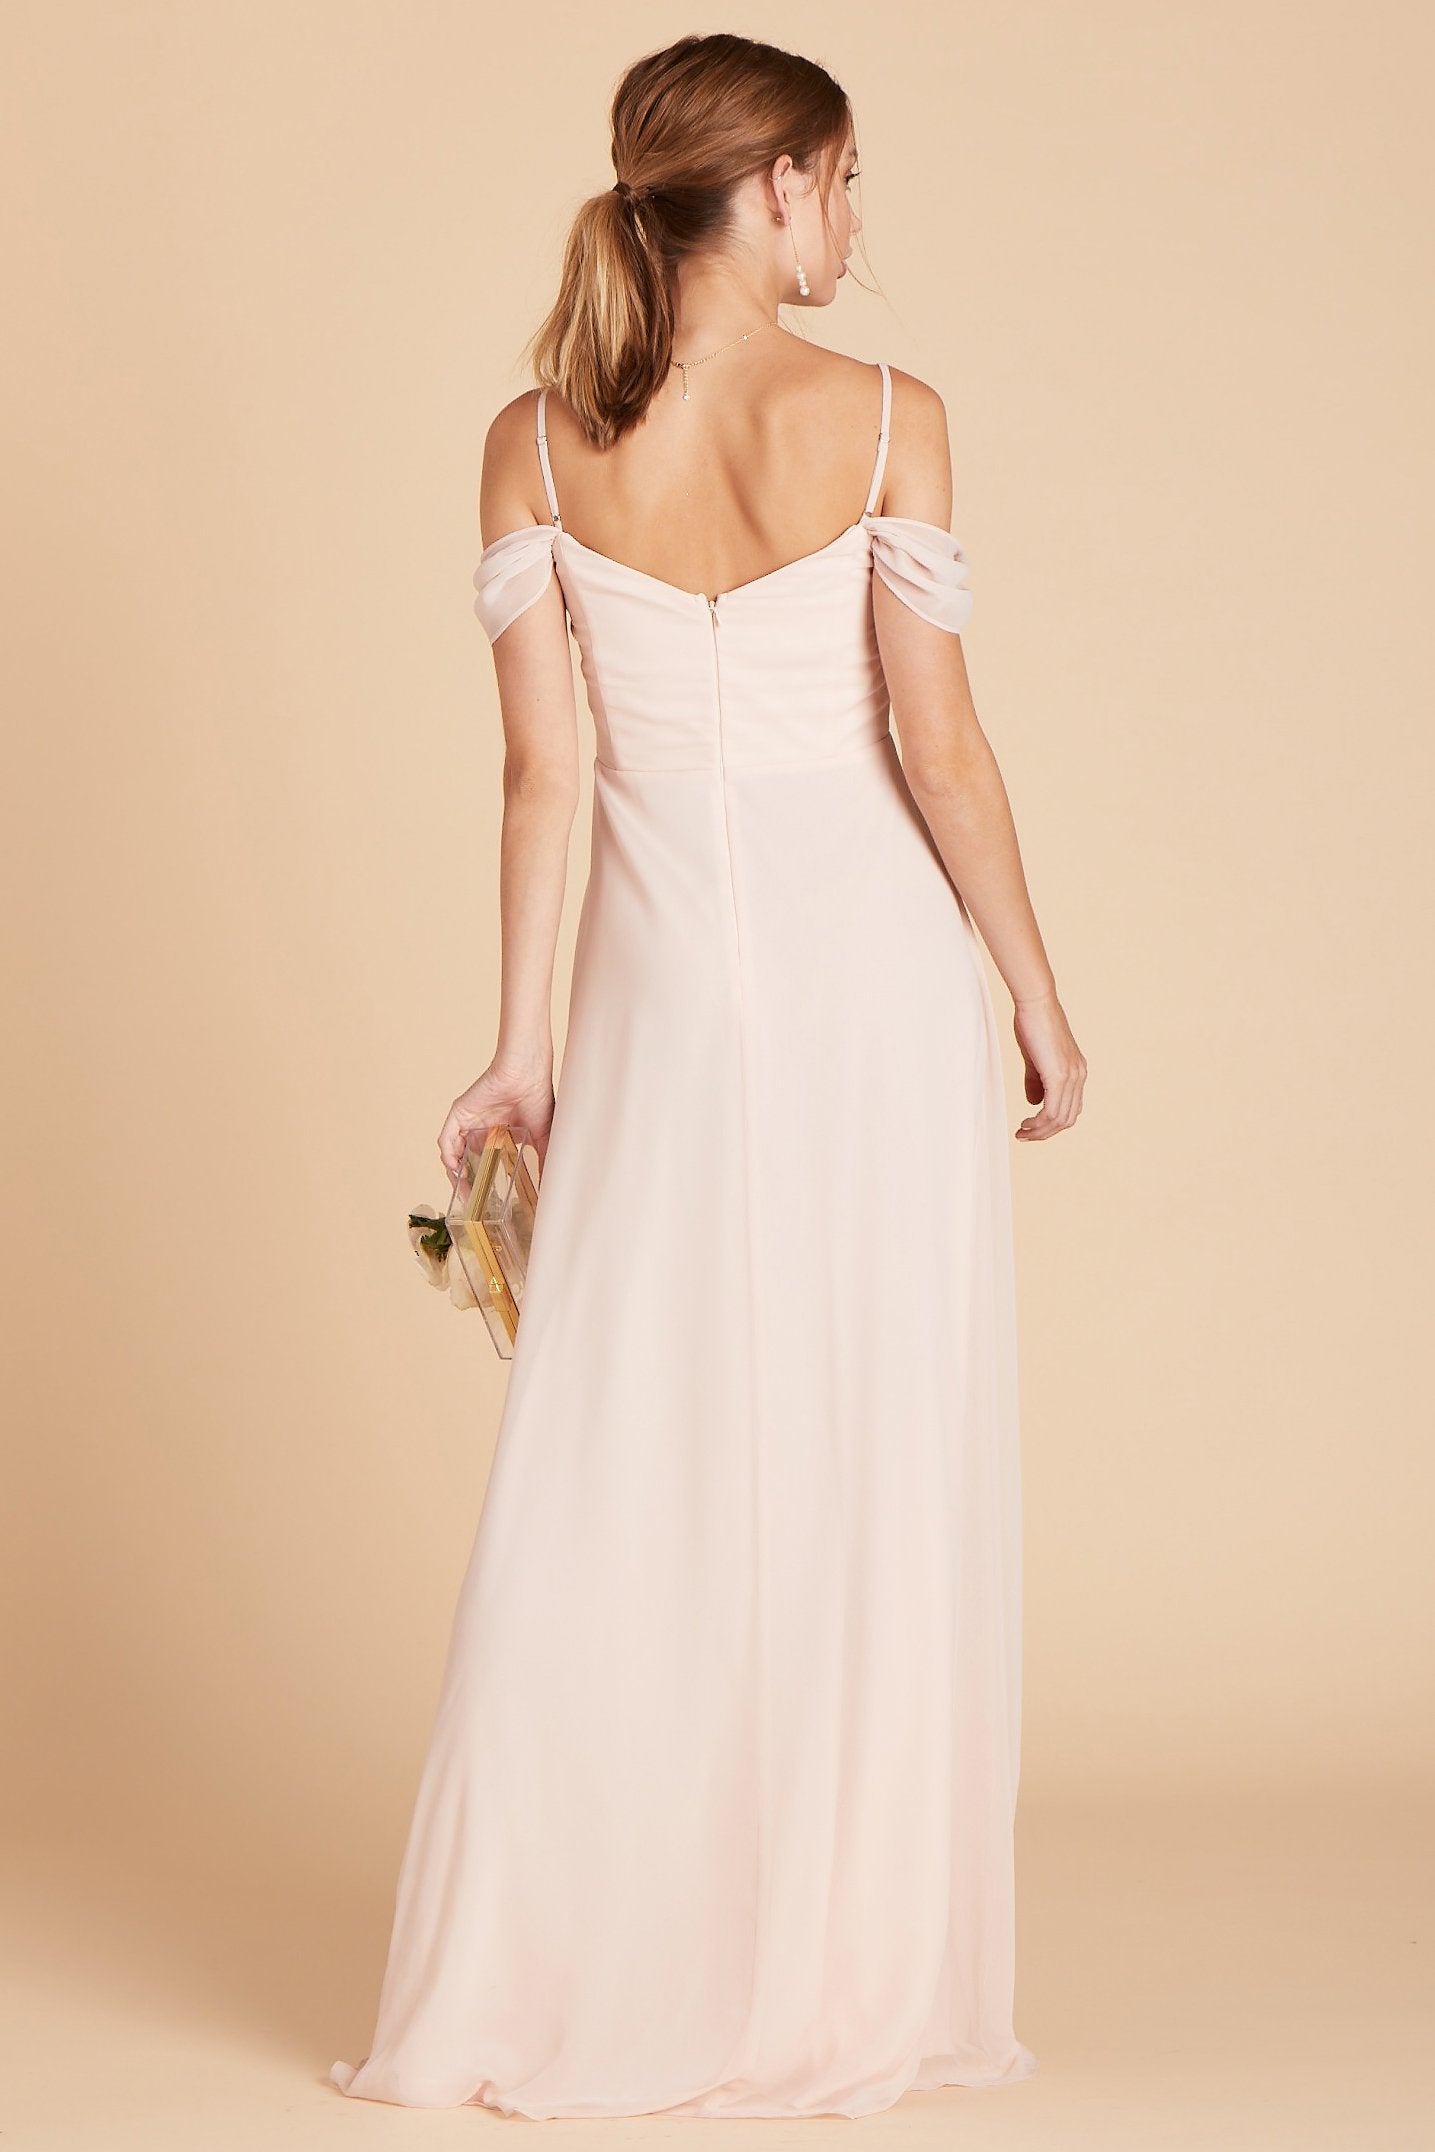 Spence convertible bridesmaid dress in pale blush chiffon by Birdy Grey, back view